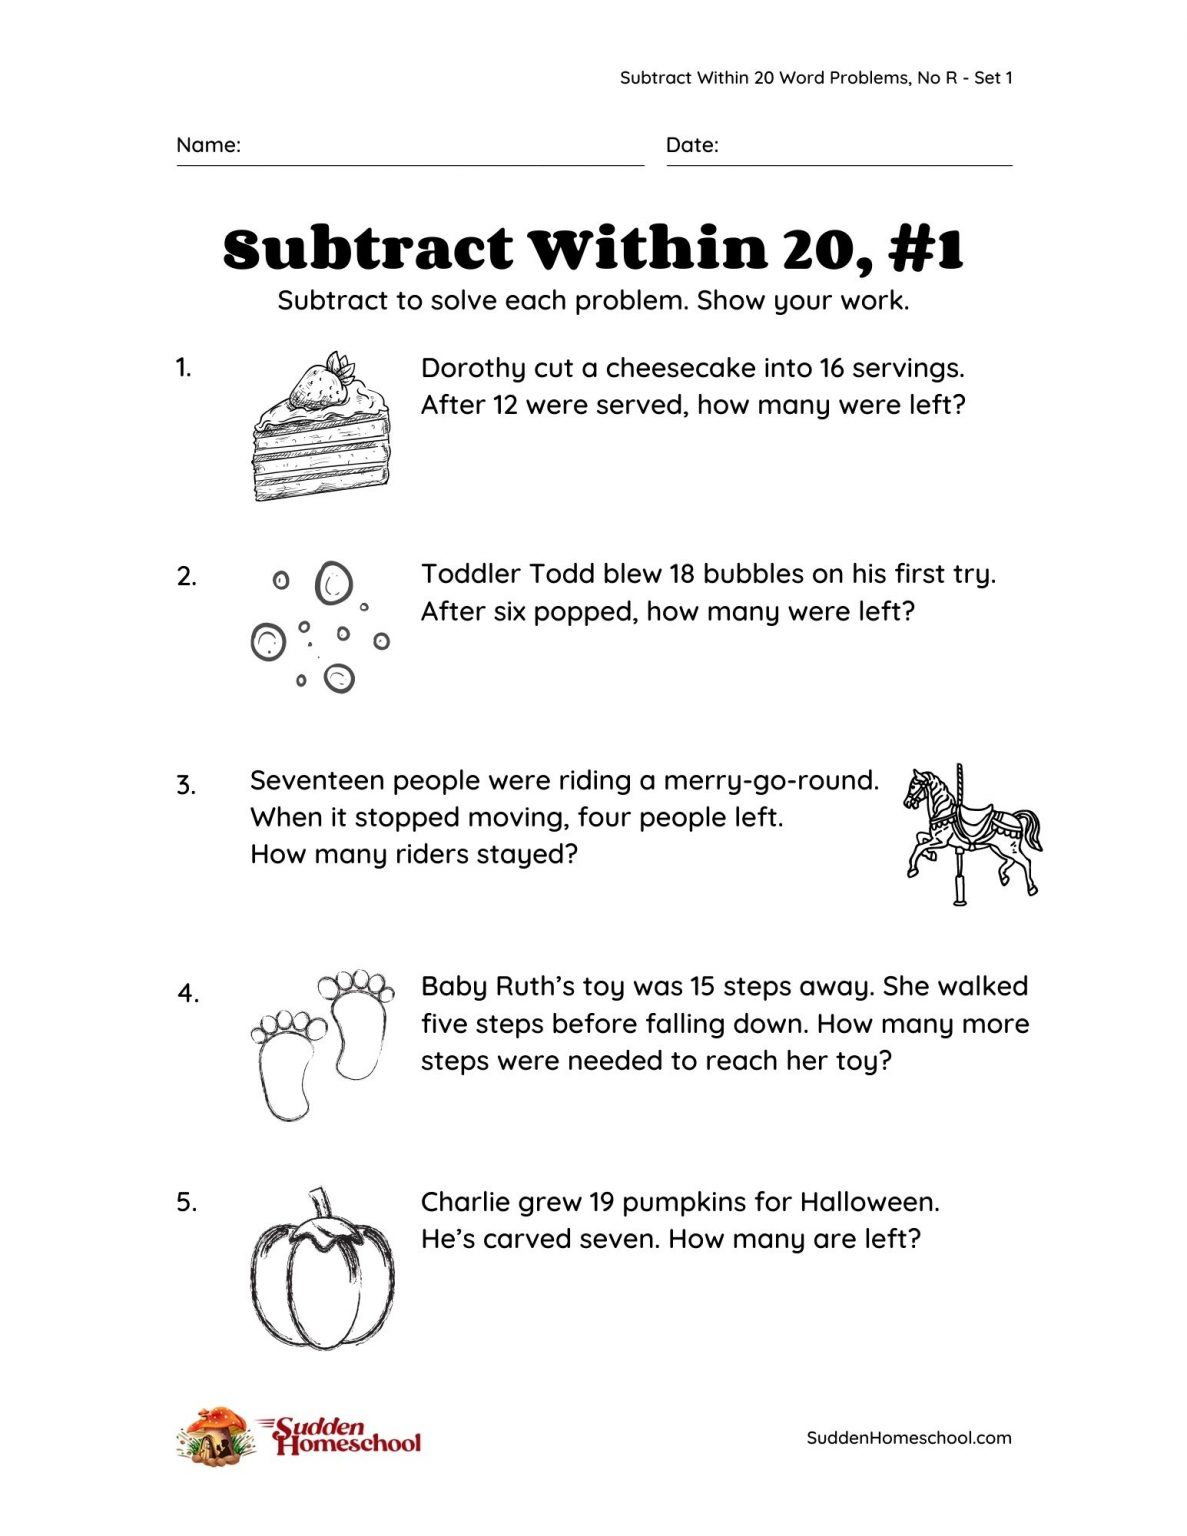 subtraction-word-problems-subtract-within-20